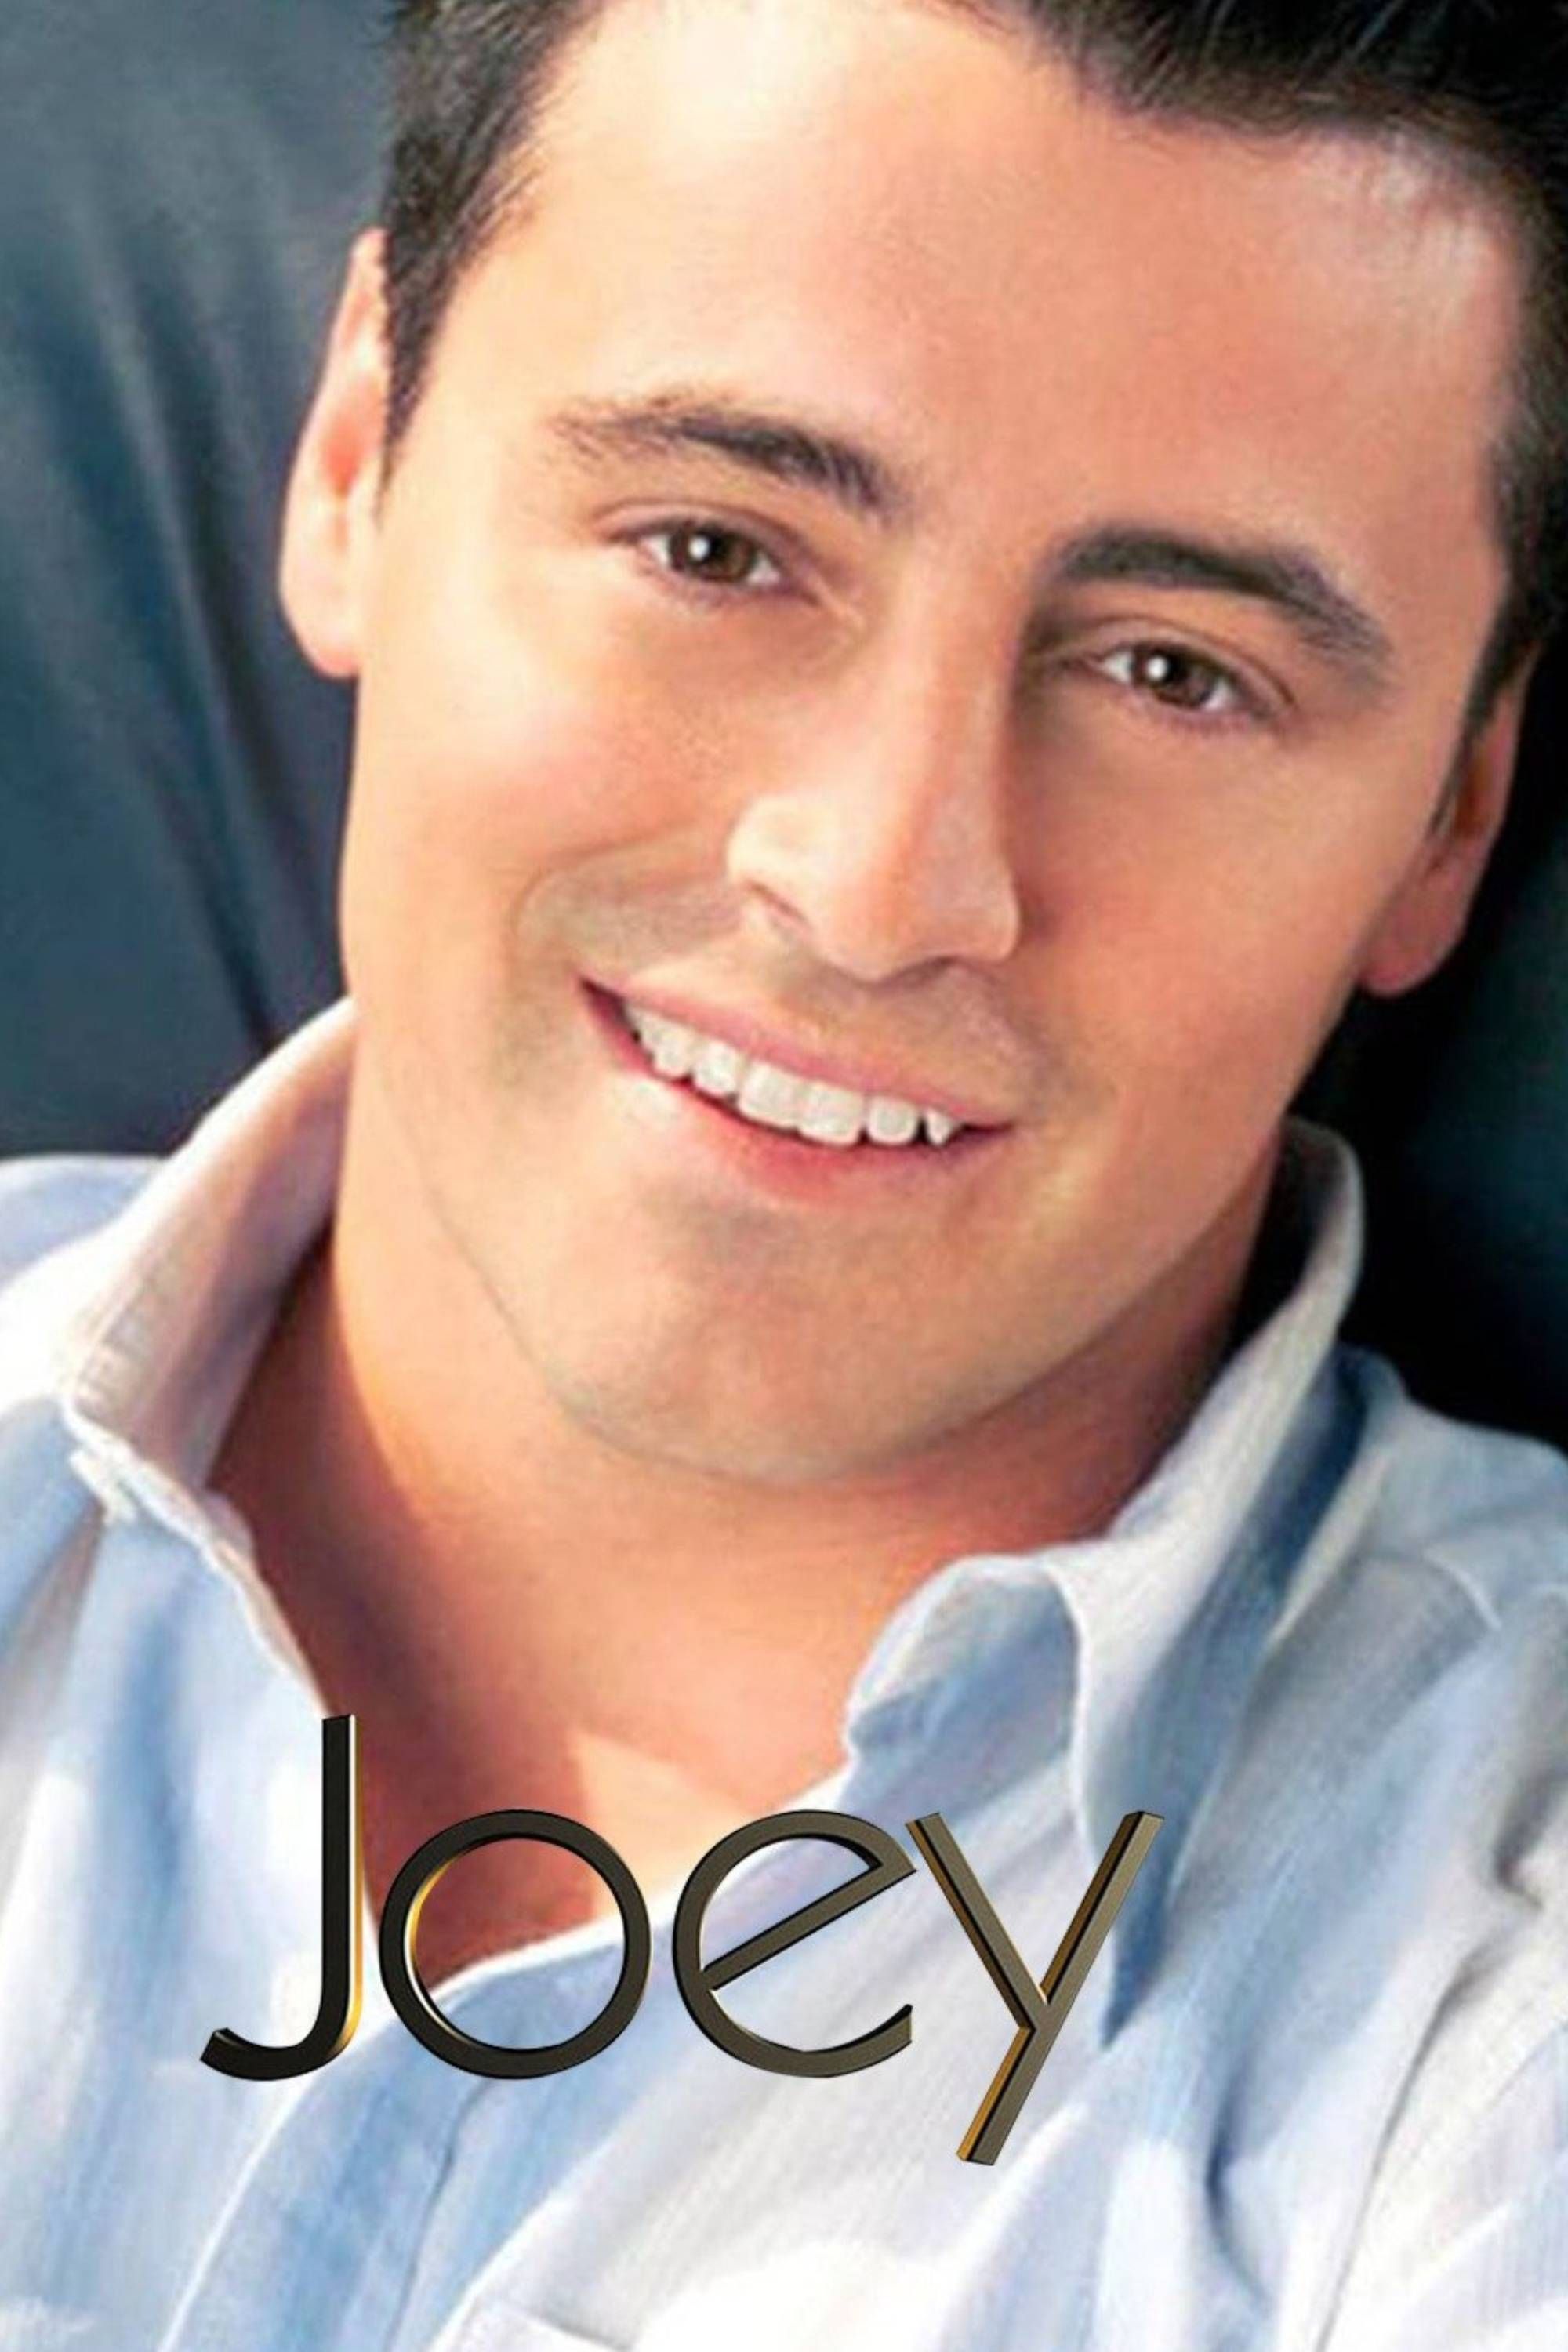 joey poster